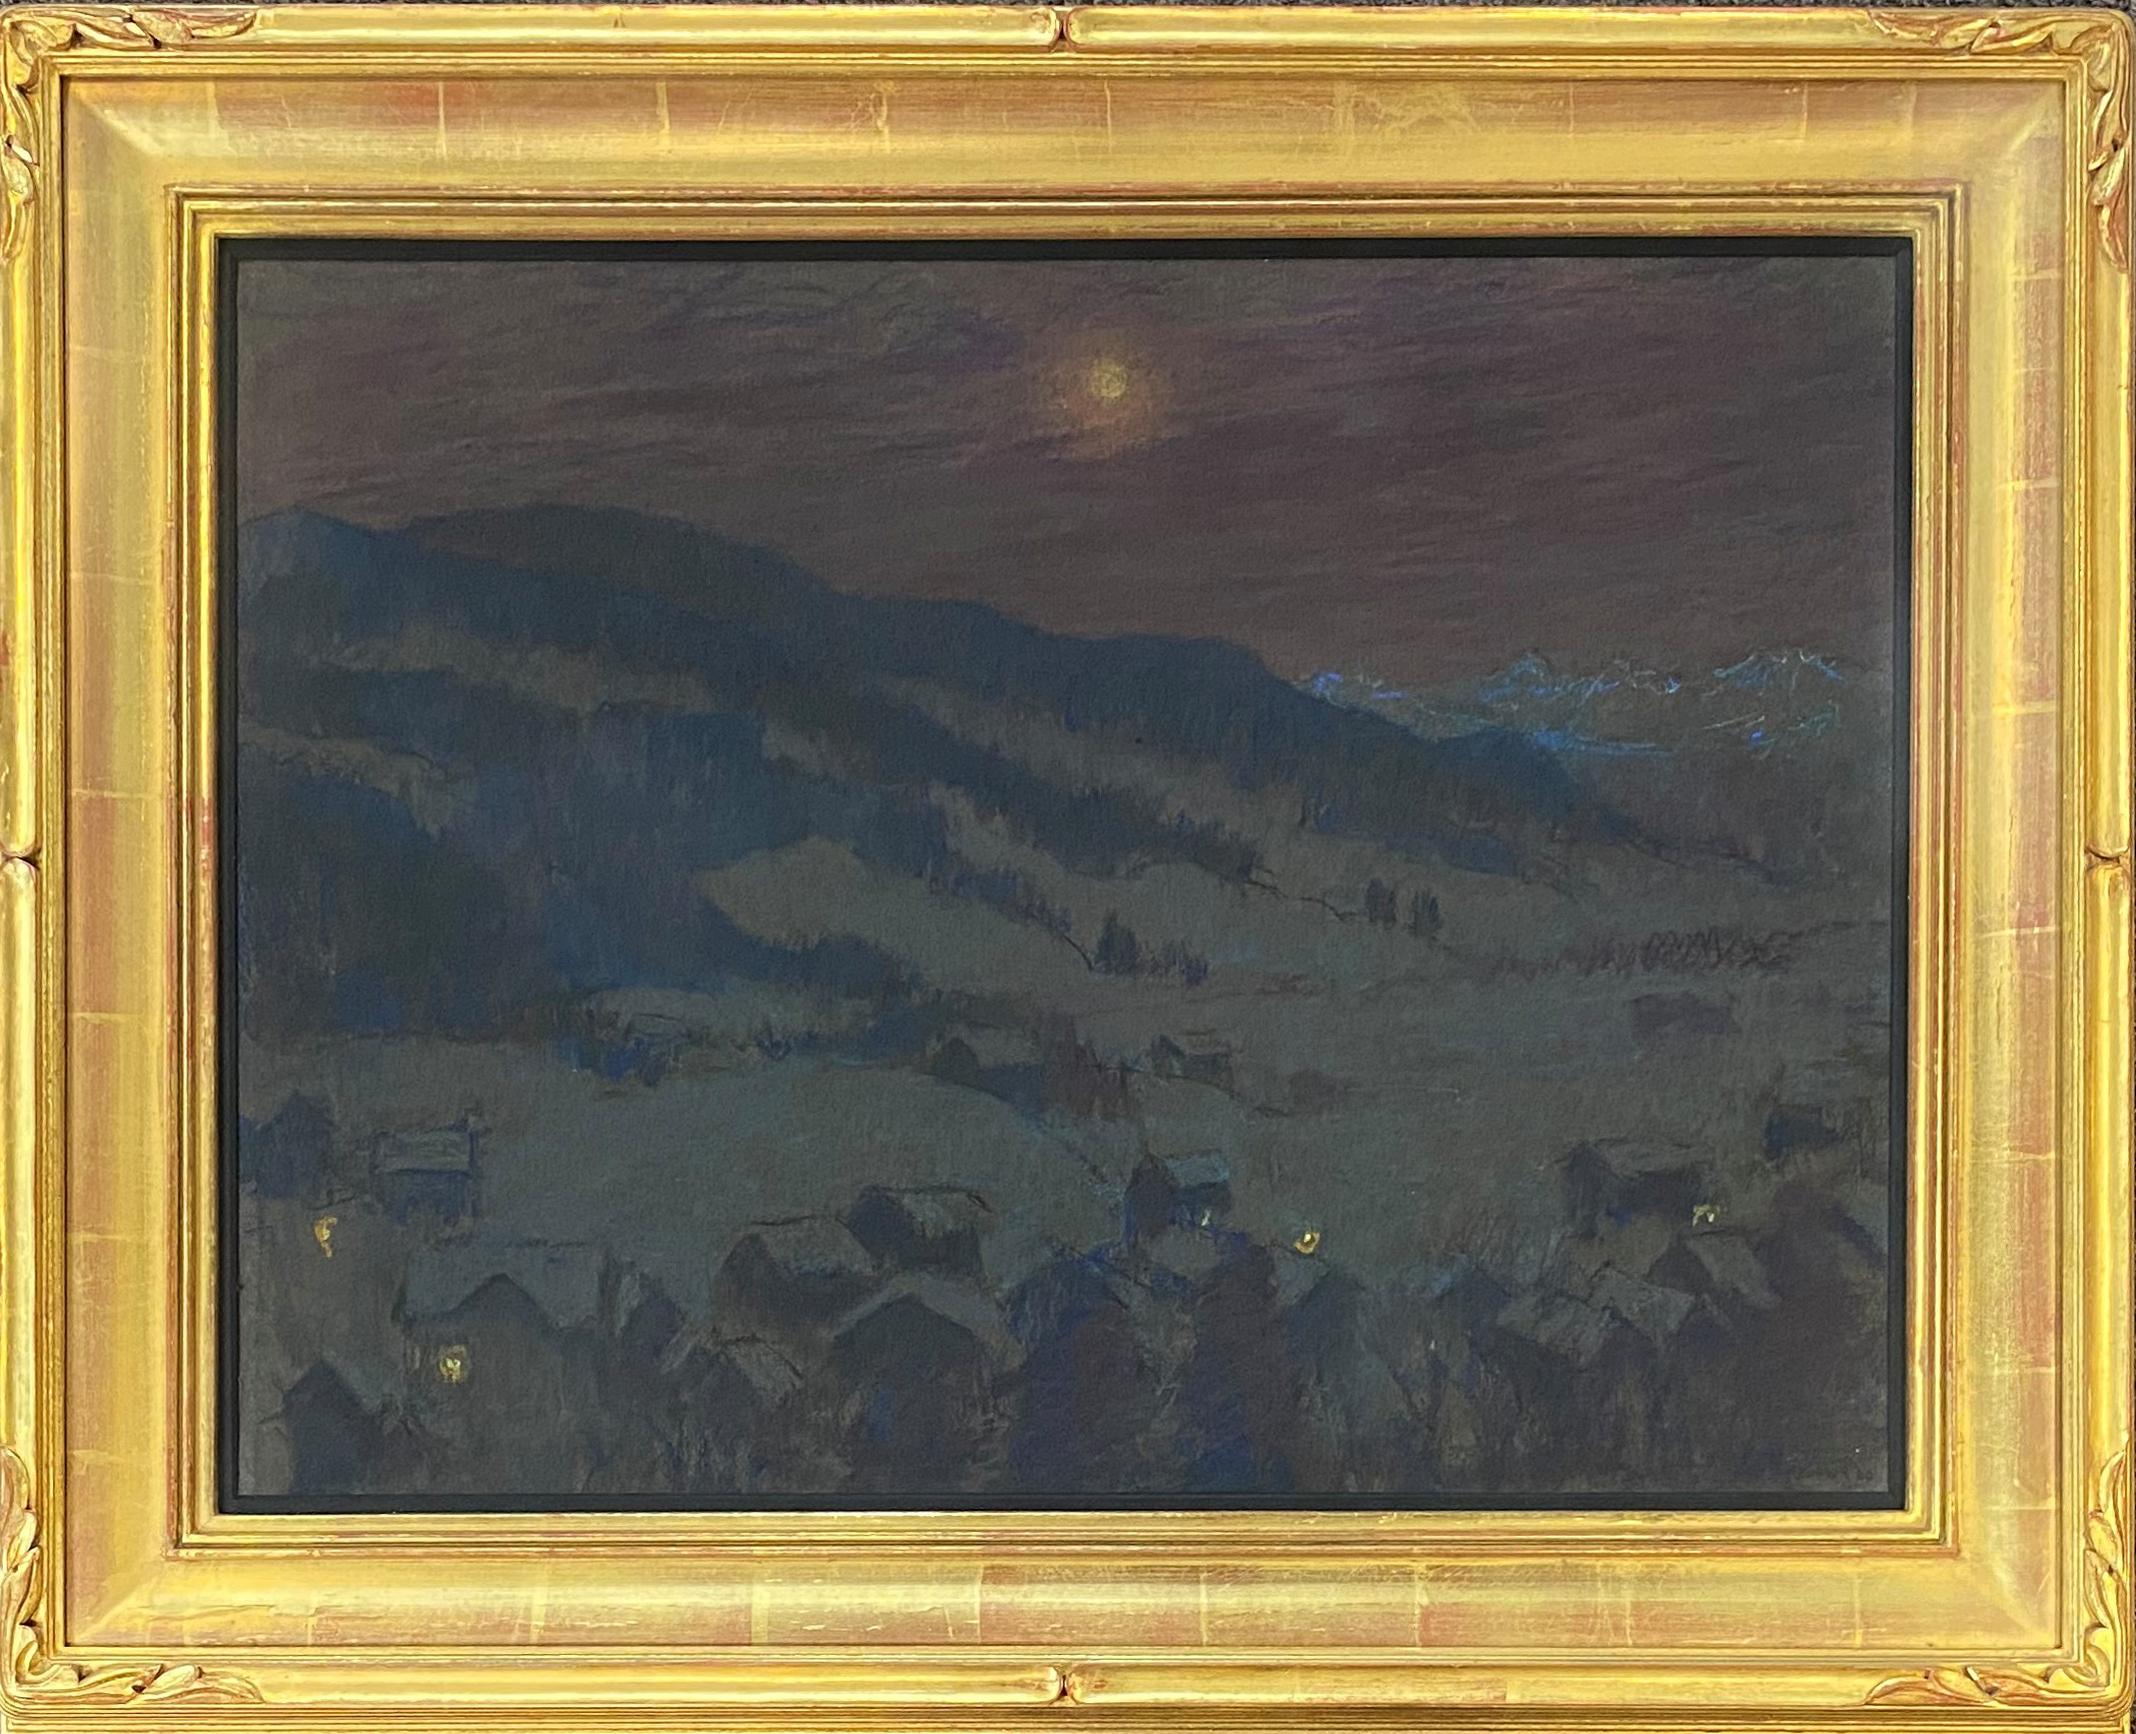 Nocturnal of Gstaad - Art by William Samuel Horton